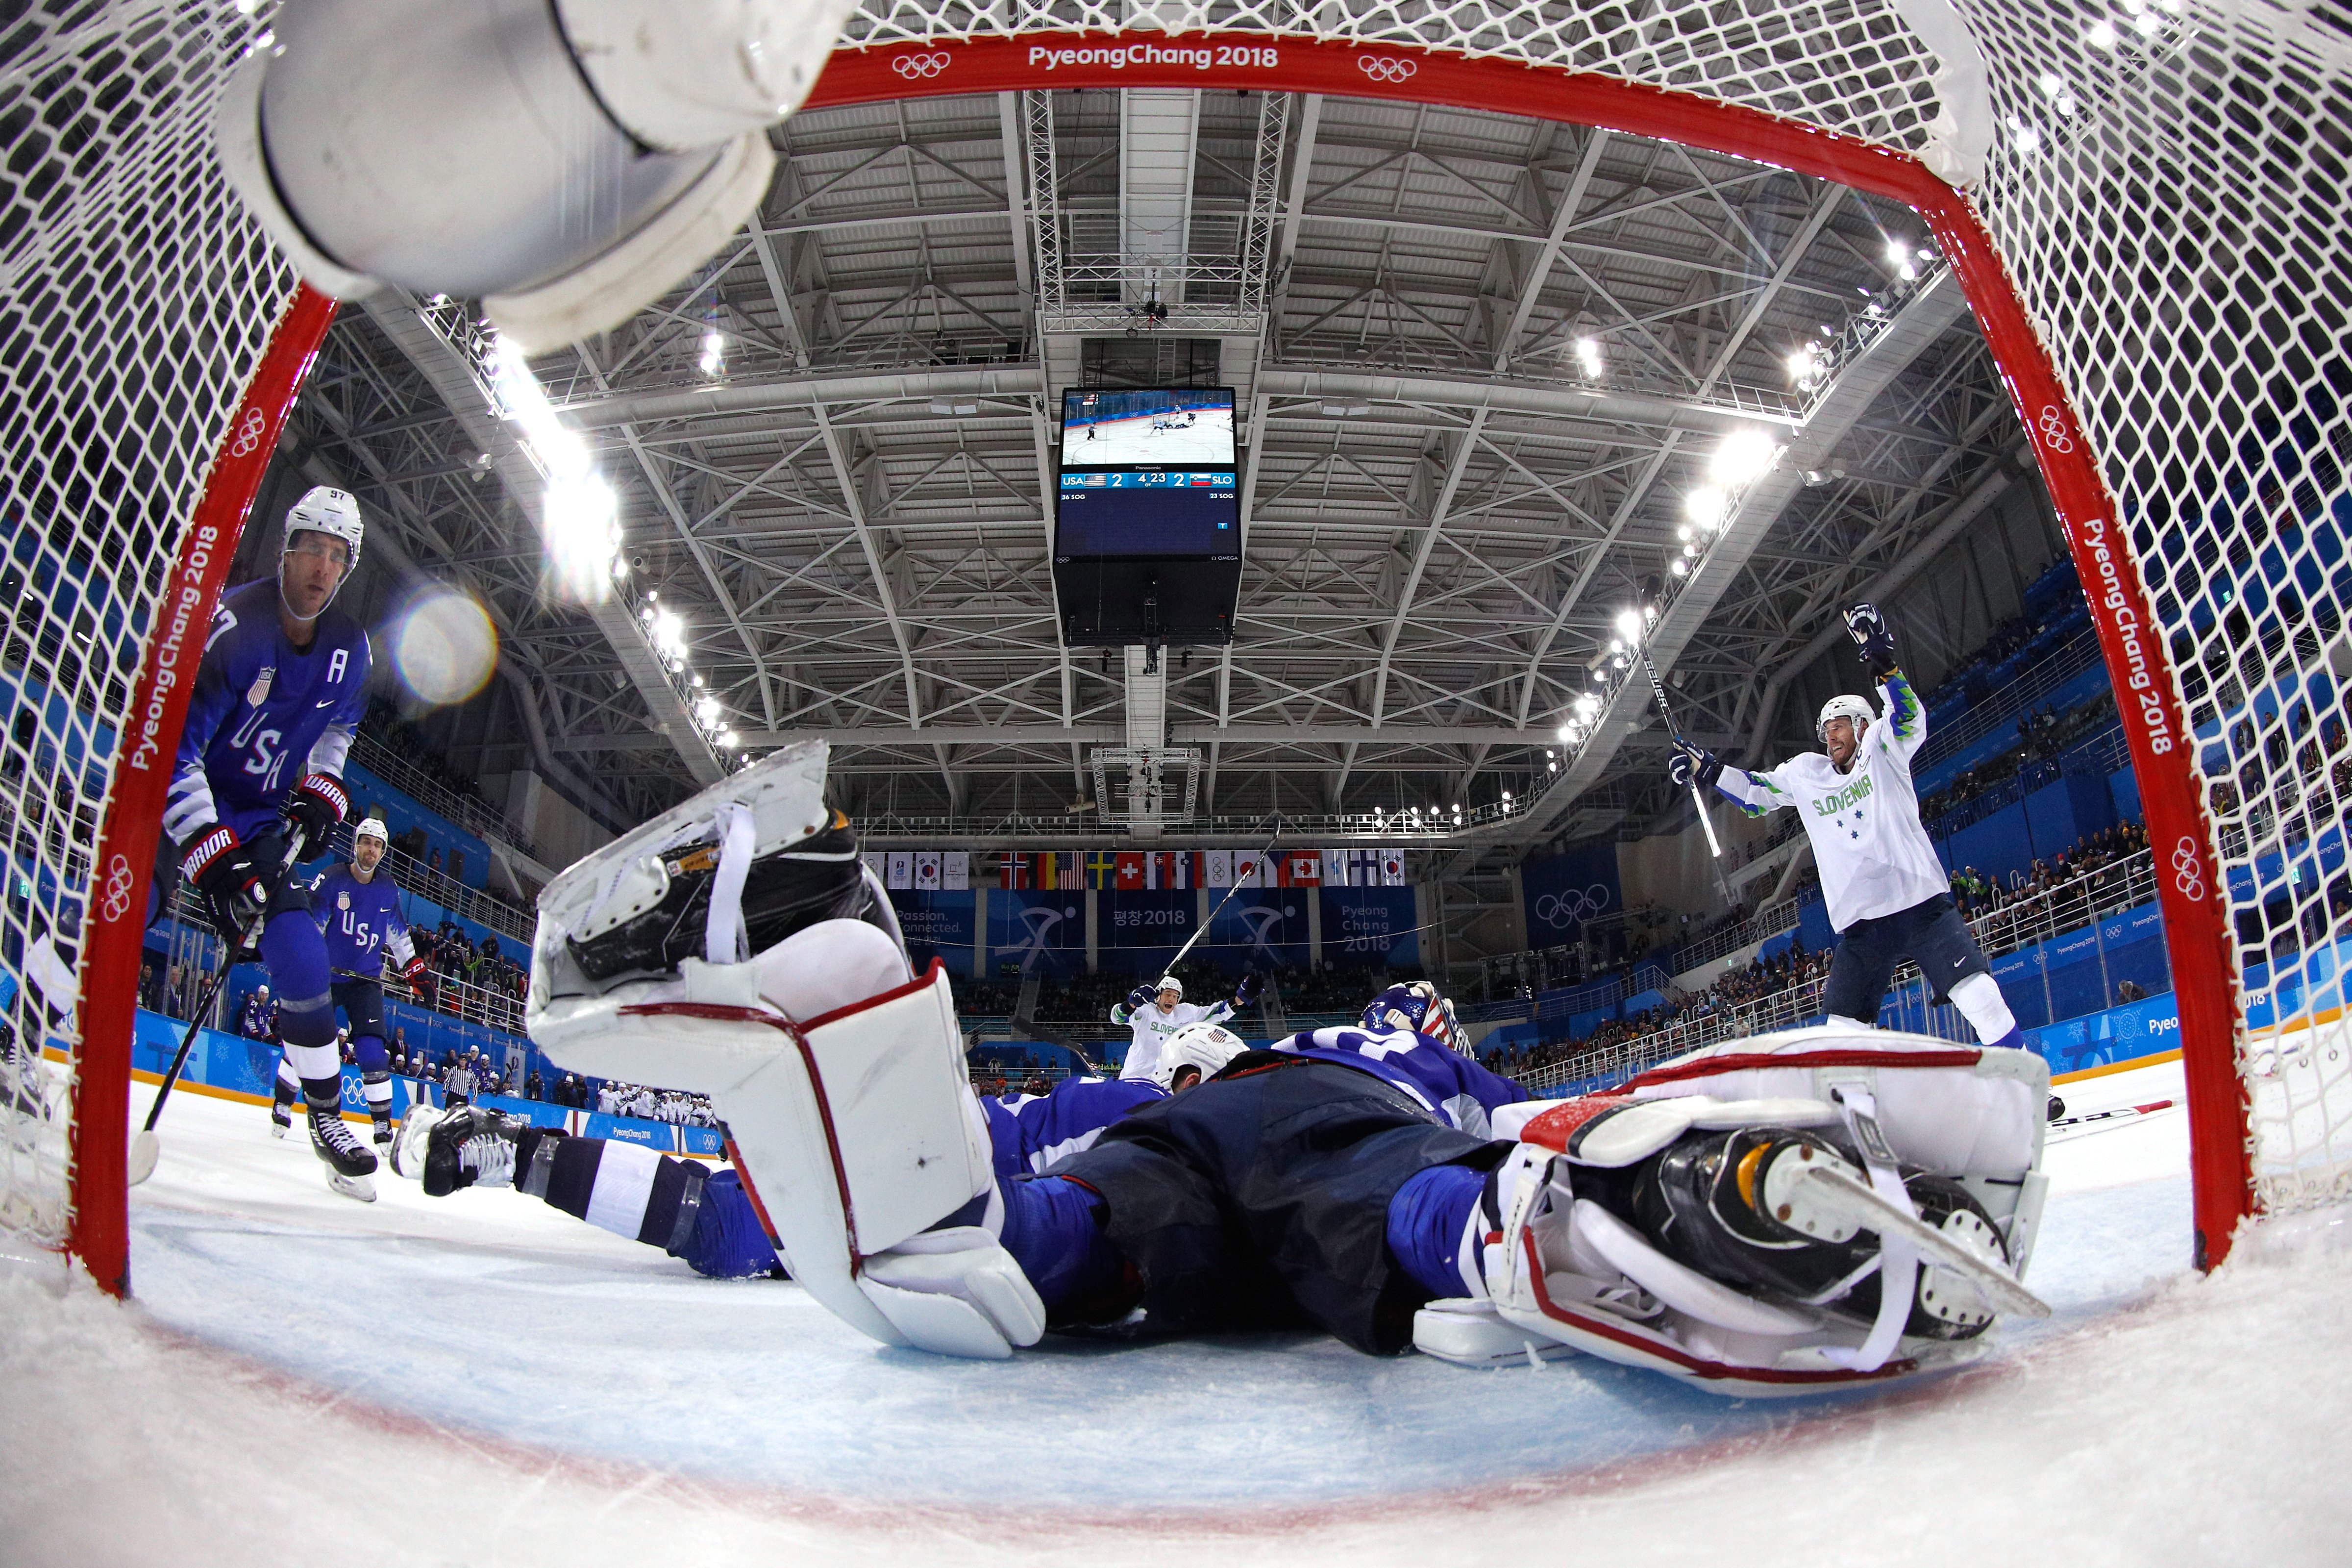 Jan Mursak #39 of Slovenia celebrates after scoring the game winning goal against Ryan Zapolski #30 of the United States in overtime of the Men's Ice Hockey Preliminary Round Group B game on day five of the PyeongChang 2018 Winter Olympics at Kwandong Hockey Centre on February 14, 2018 in Gangneung, South Korea. (Pool—Getty Images)